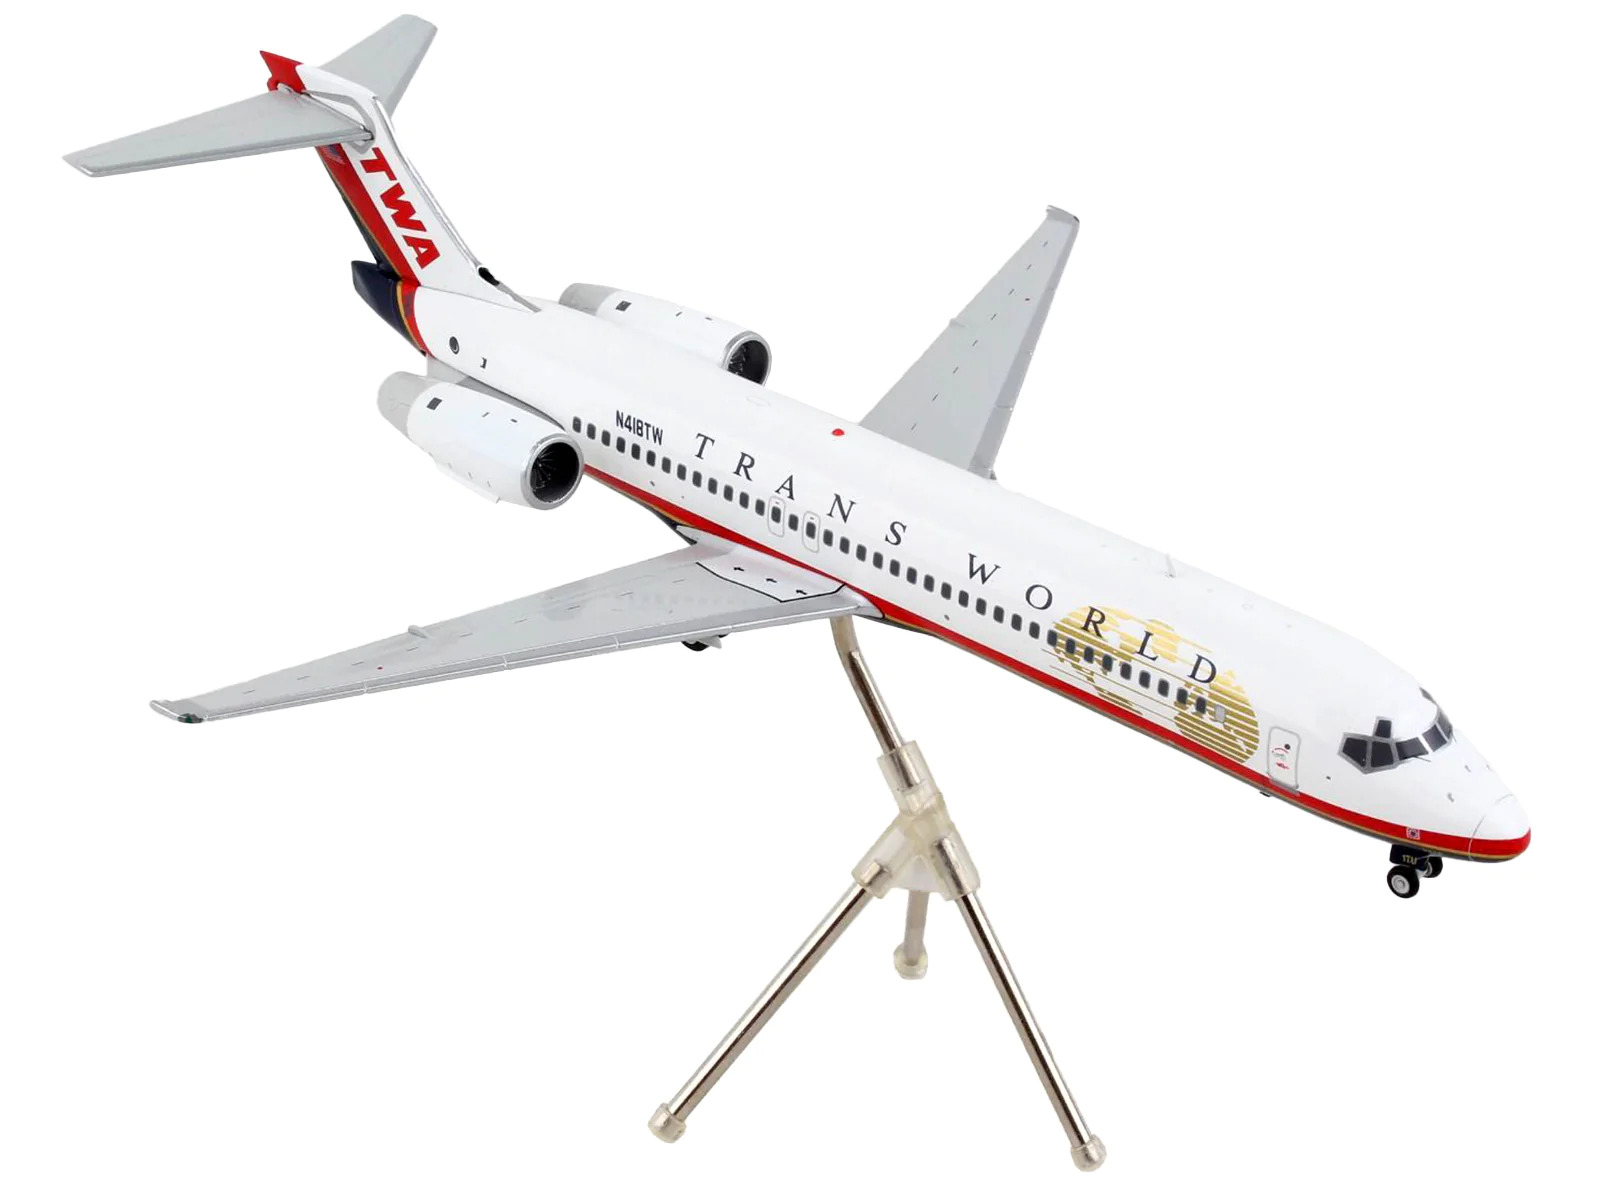 Boeing 717-200 Commercial Trans Airlines Gemini 200 1/200 Diecast Model Airplane